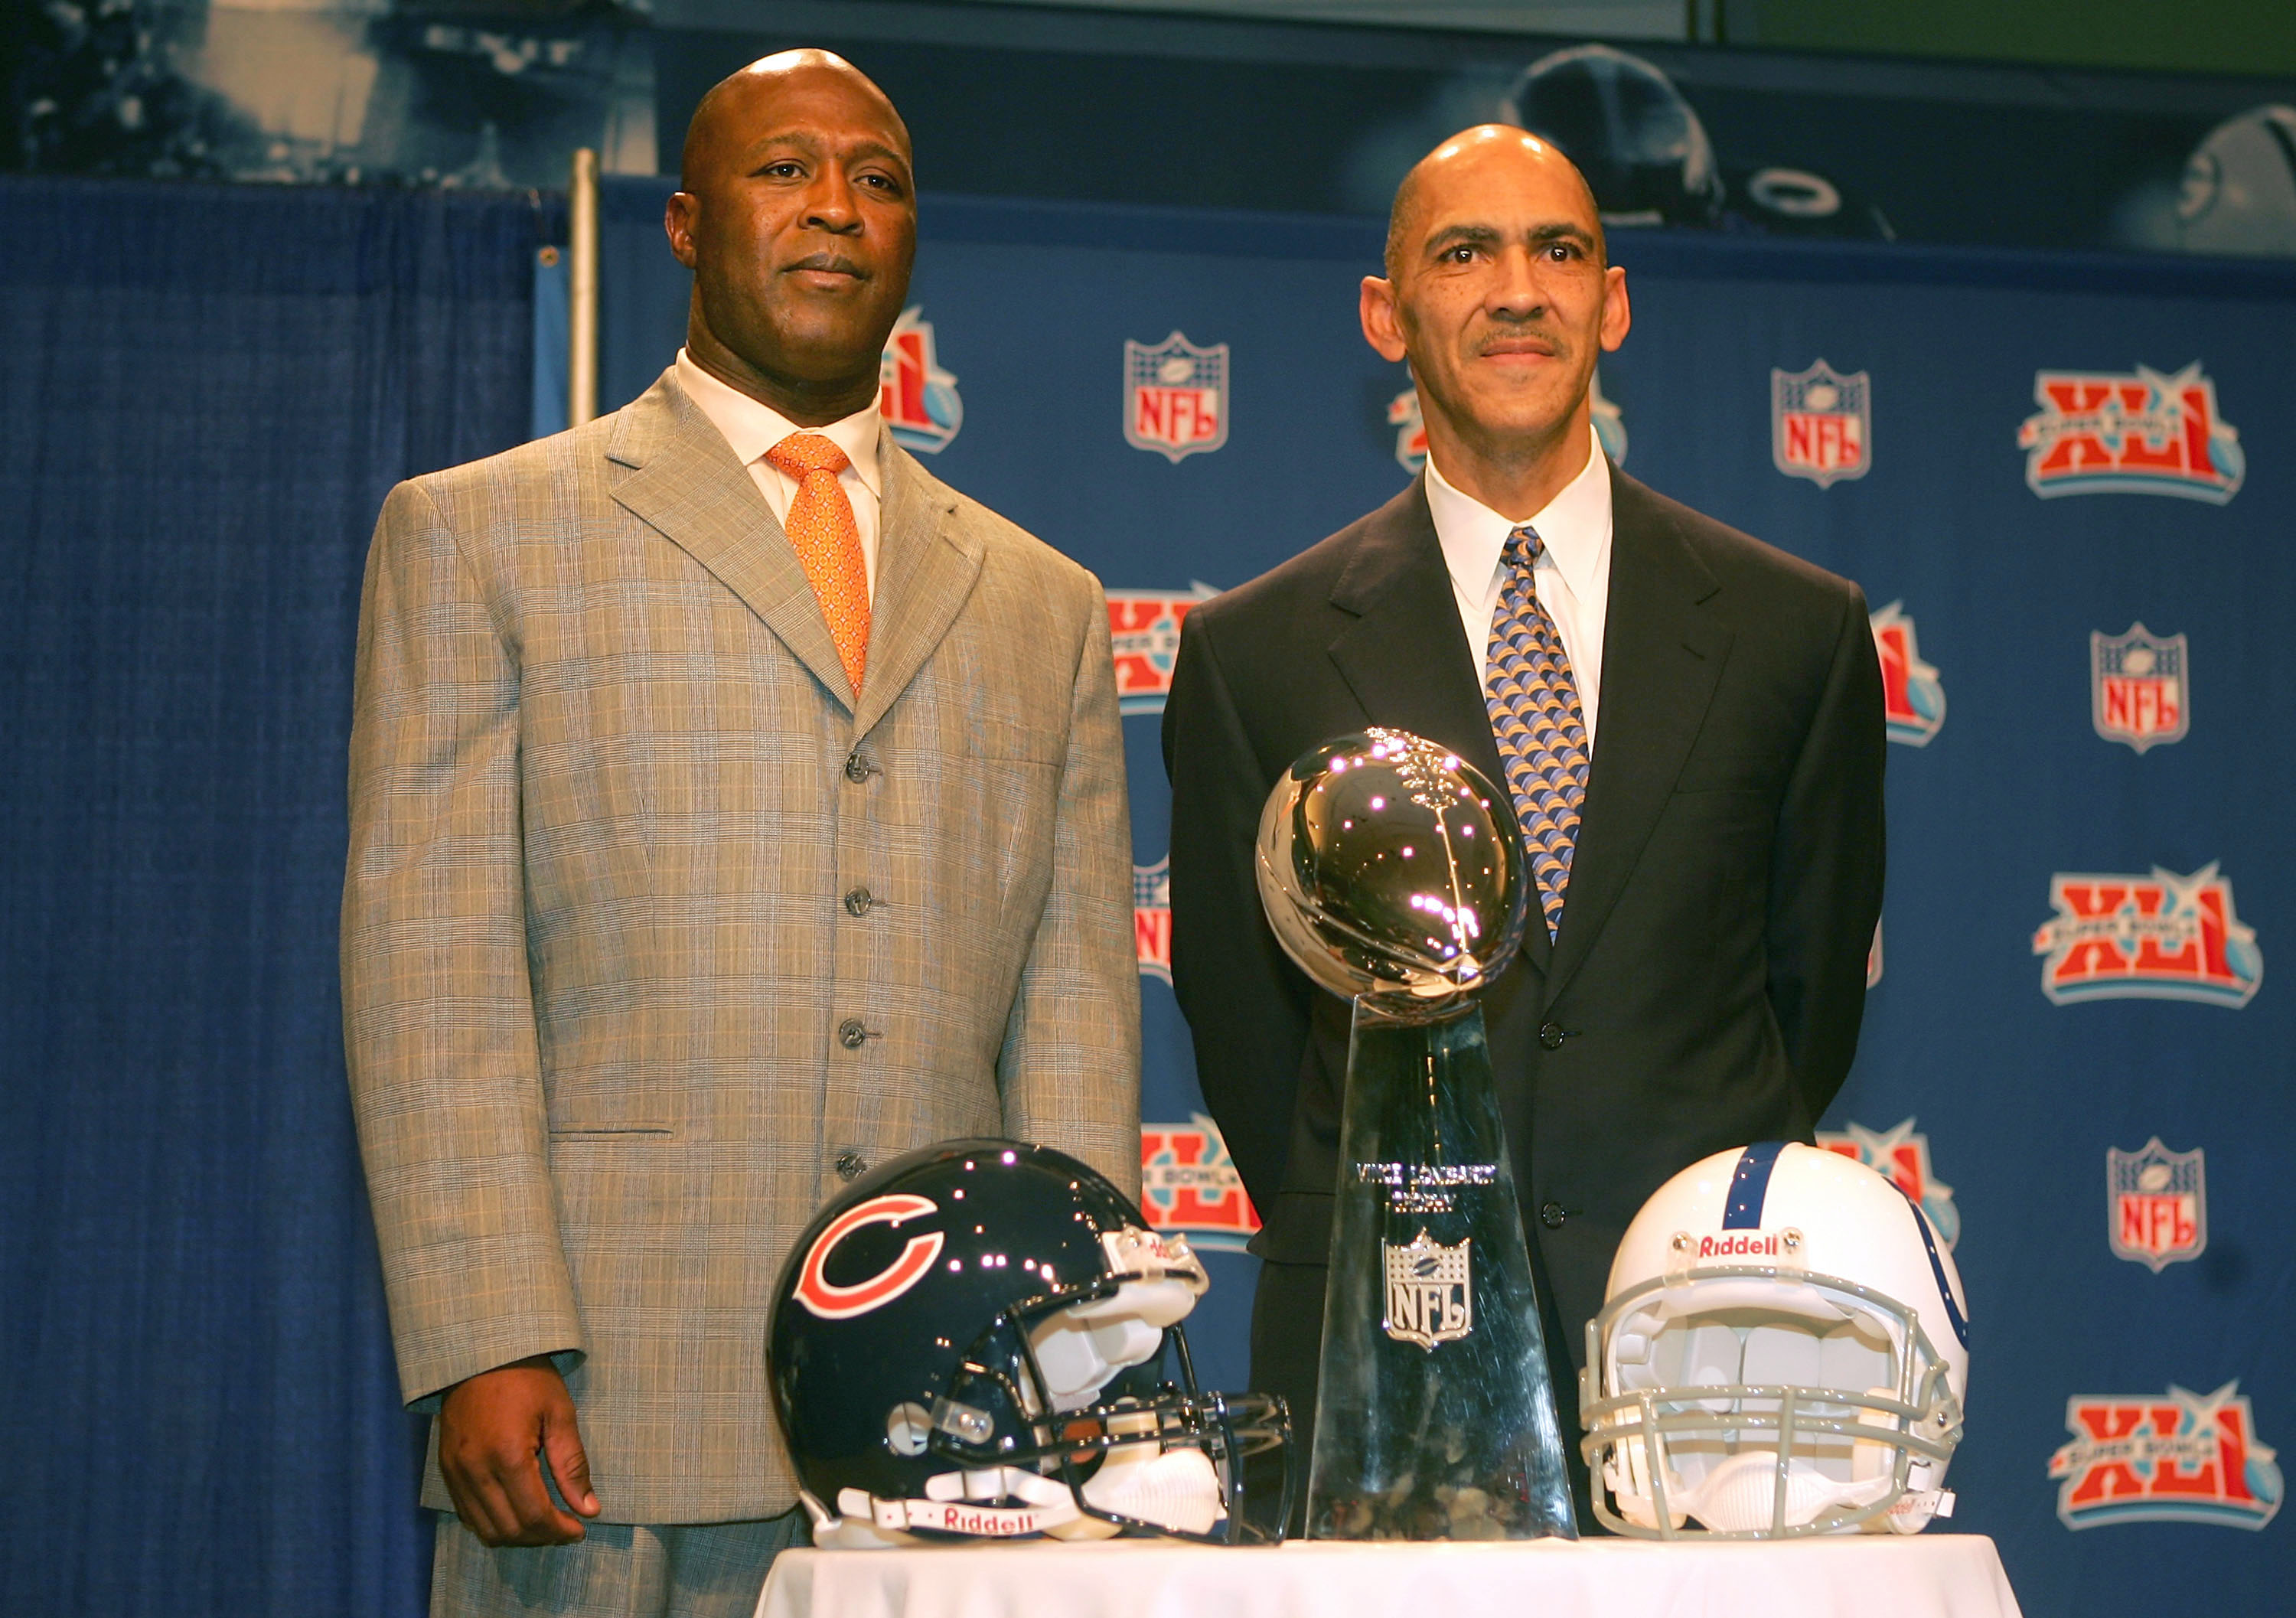 MIAMI - FEBRUARY 02:  (L-R) Head coaches, Lovie Smith of the Chicago Bears and Tony Dungy of the Indianapolis Colts pose together with the Super Bowl Trophy during a press conference at the Miami Beach Convention Center on February 2, 2007 in Miami, Flori